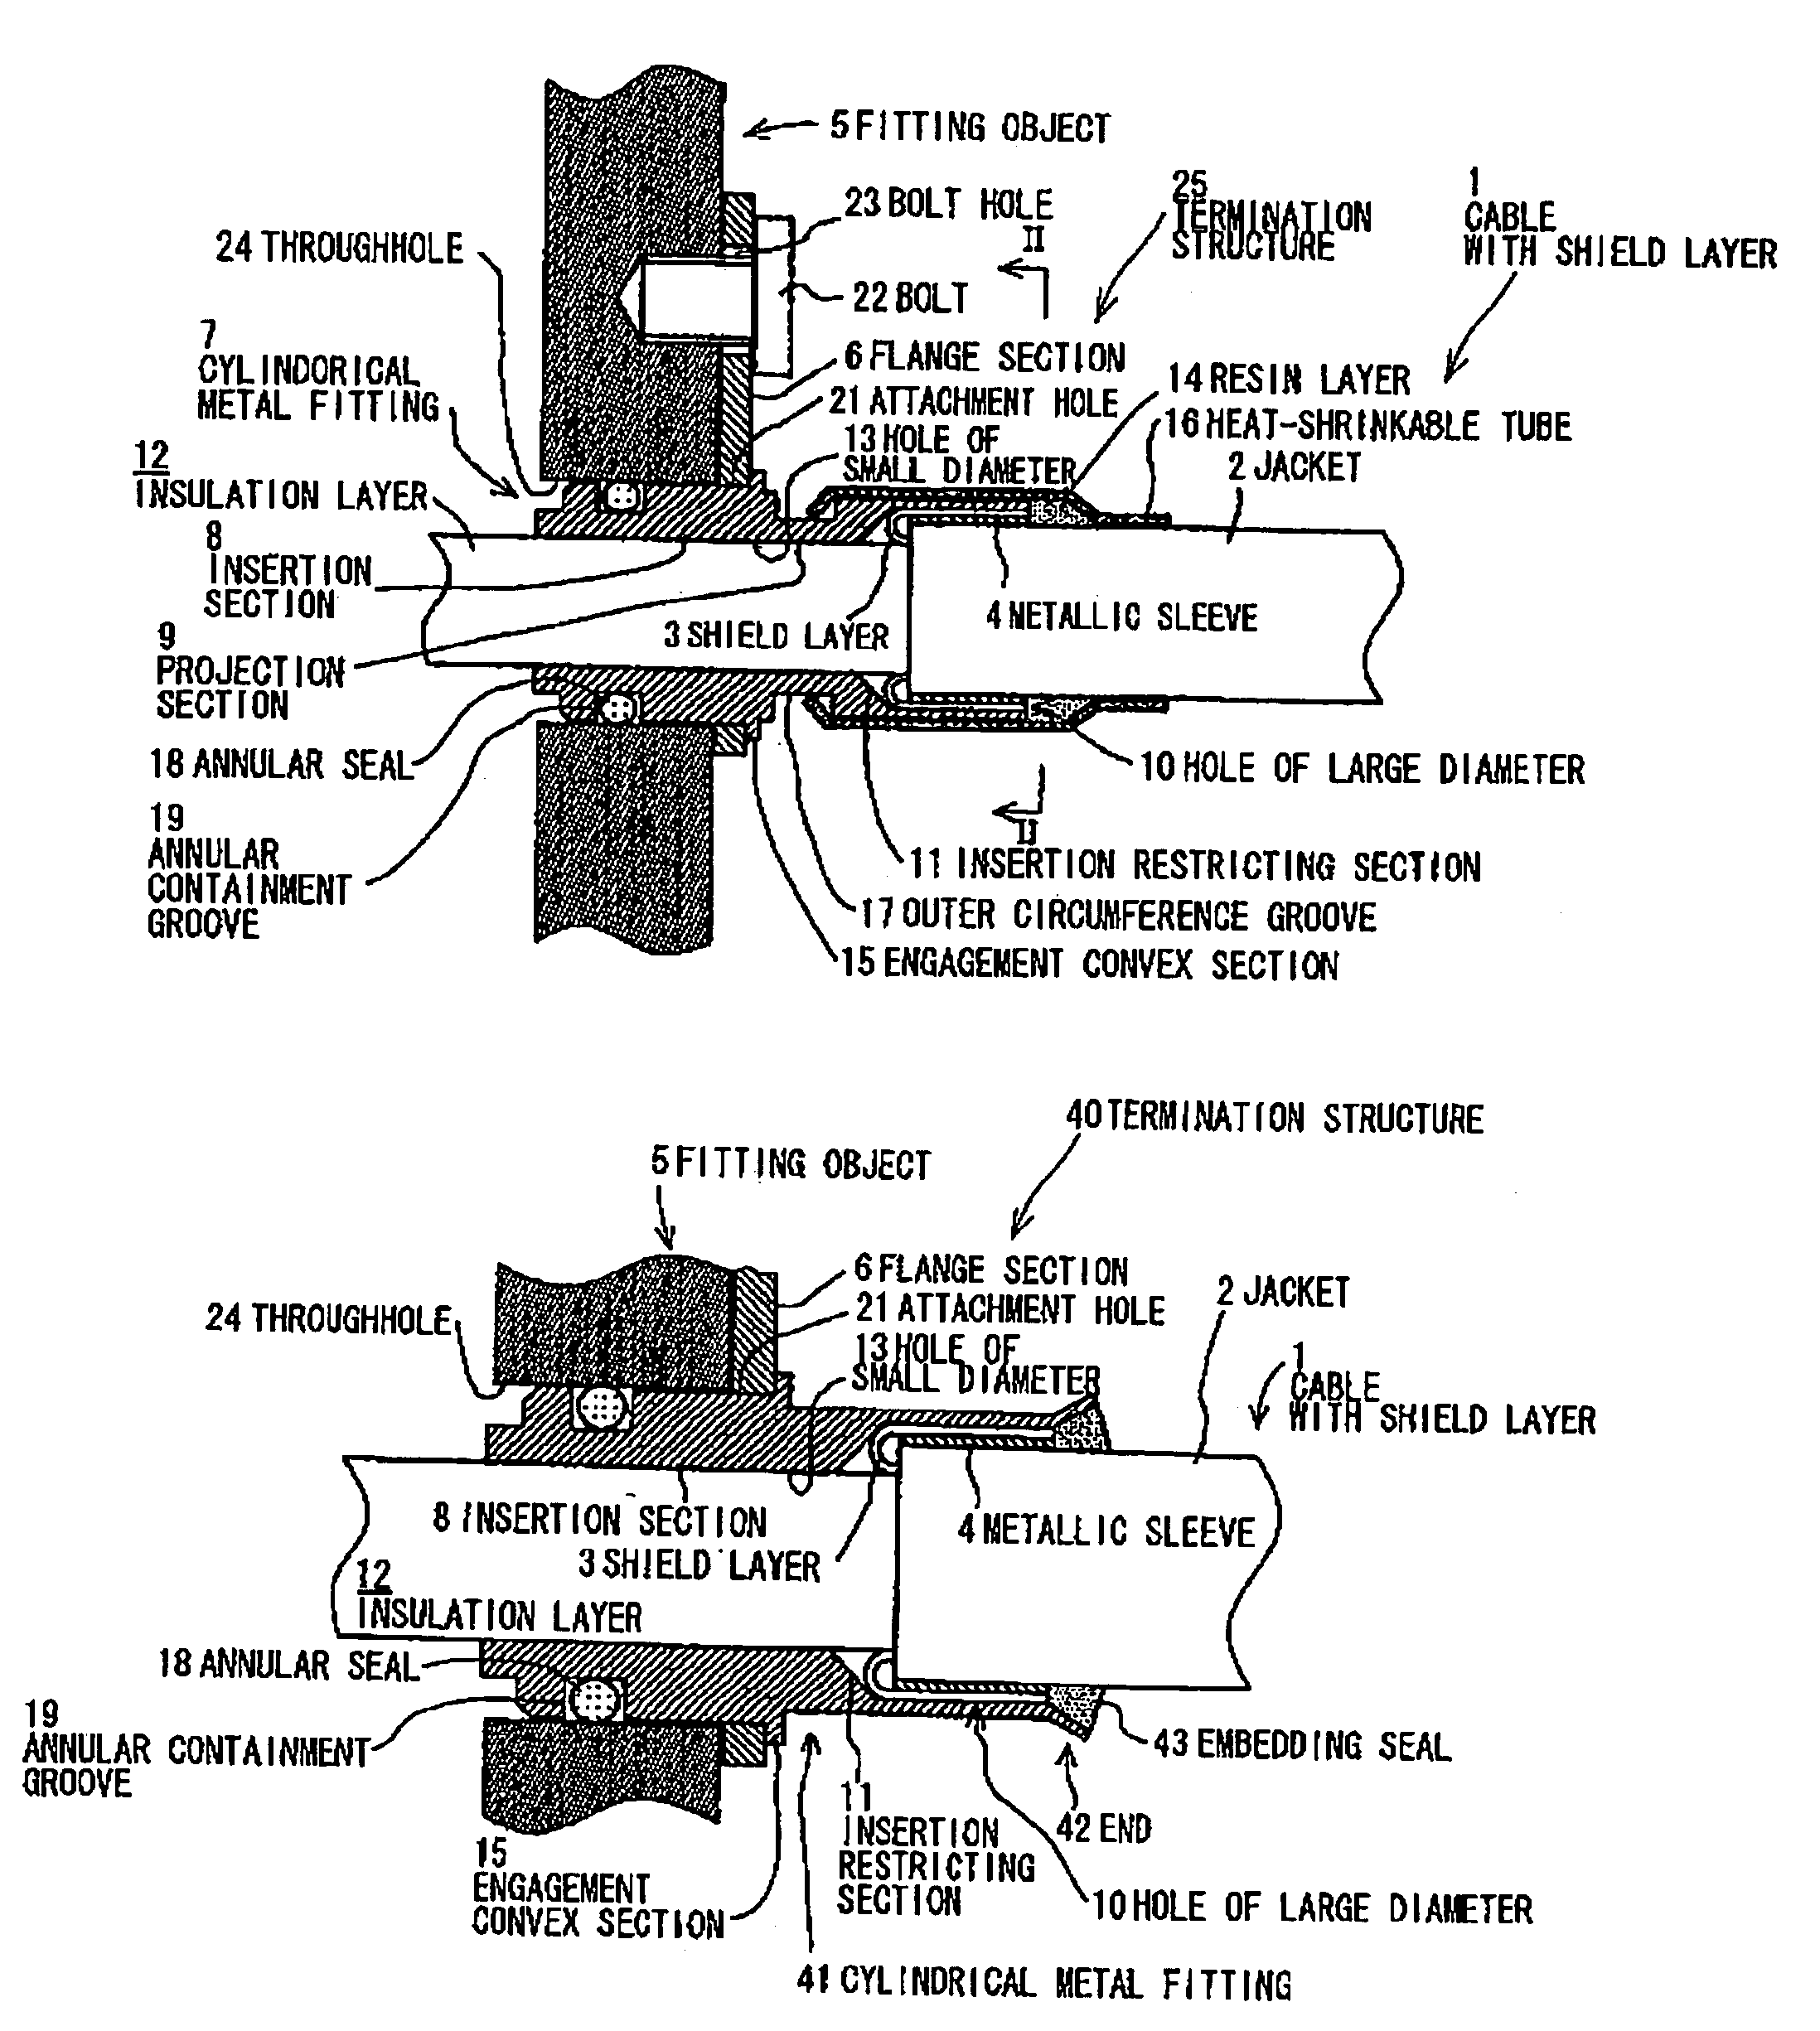 Termination structure of cable with shield layer